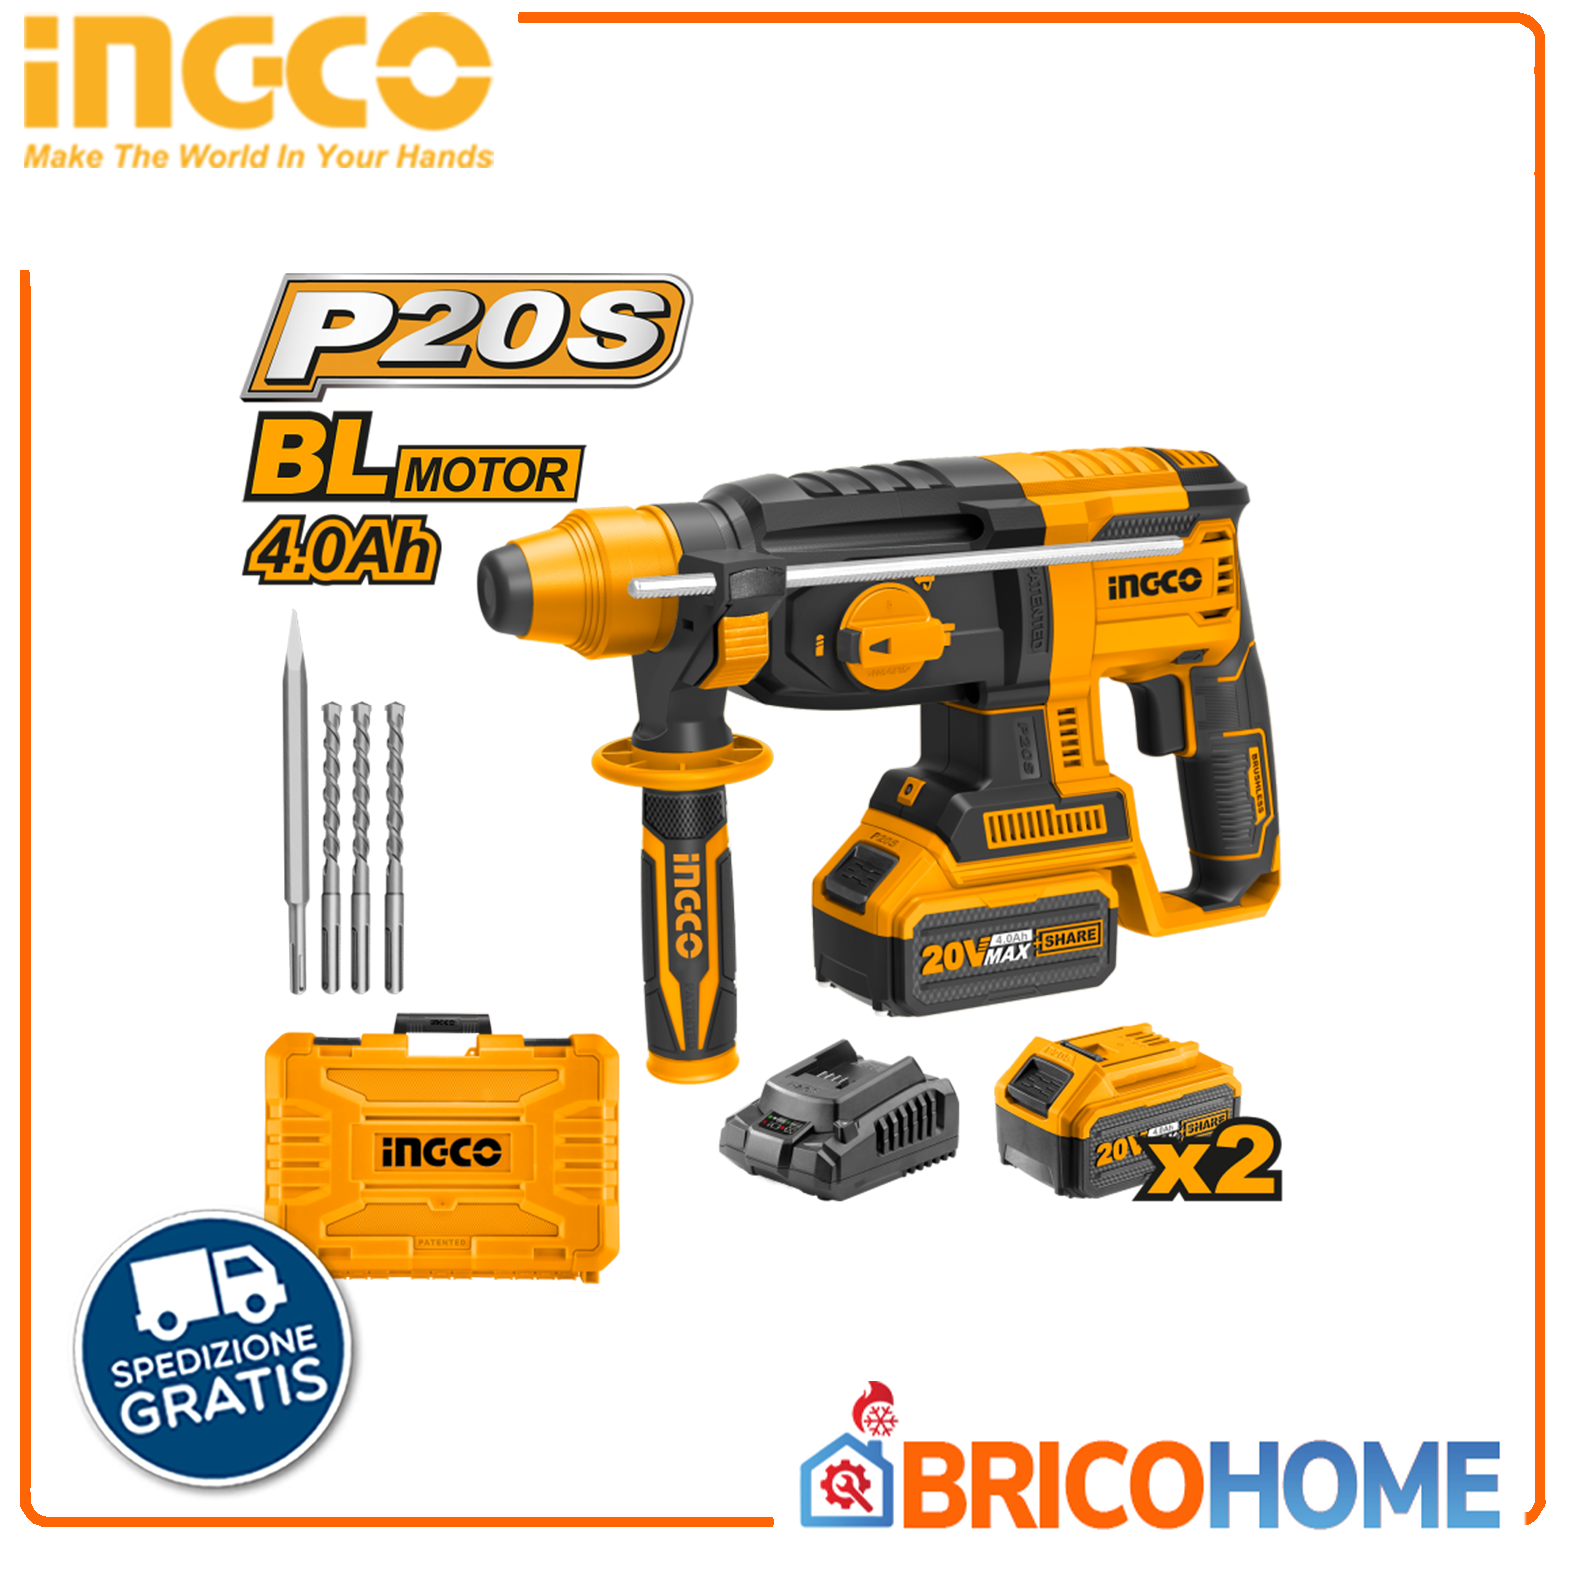 20V BRUSHLESS demolition hammer - 2 4Ah batteries and battery charger in case - INGCO